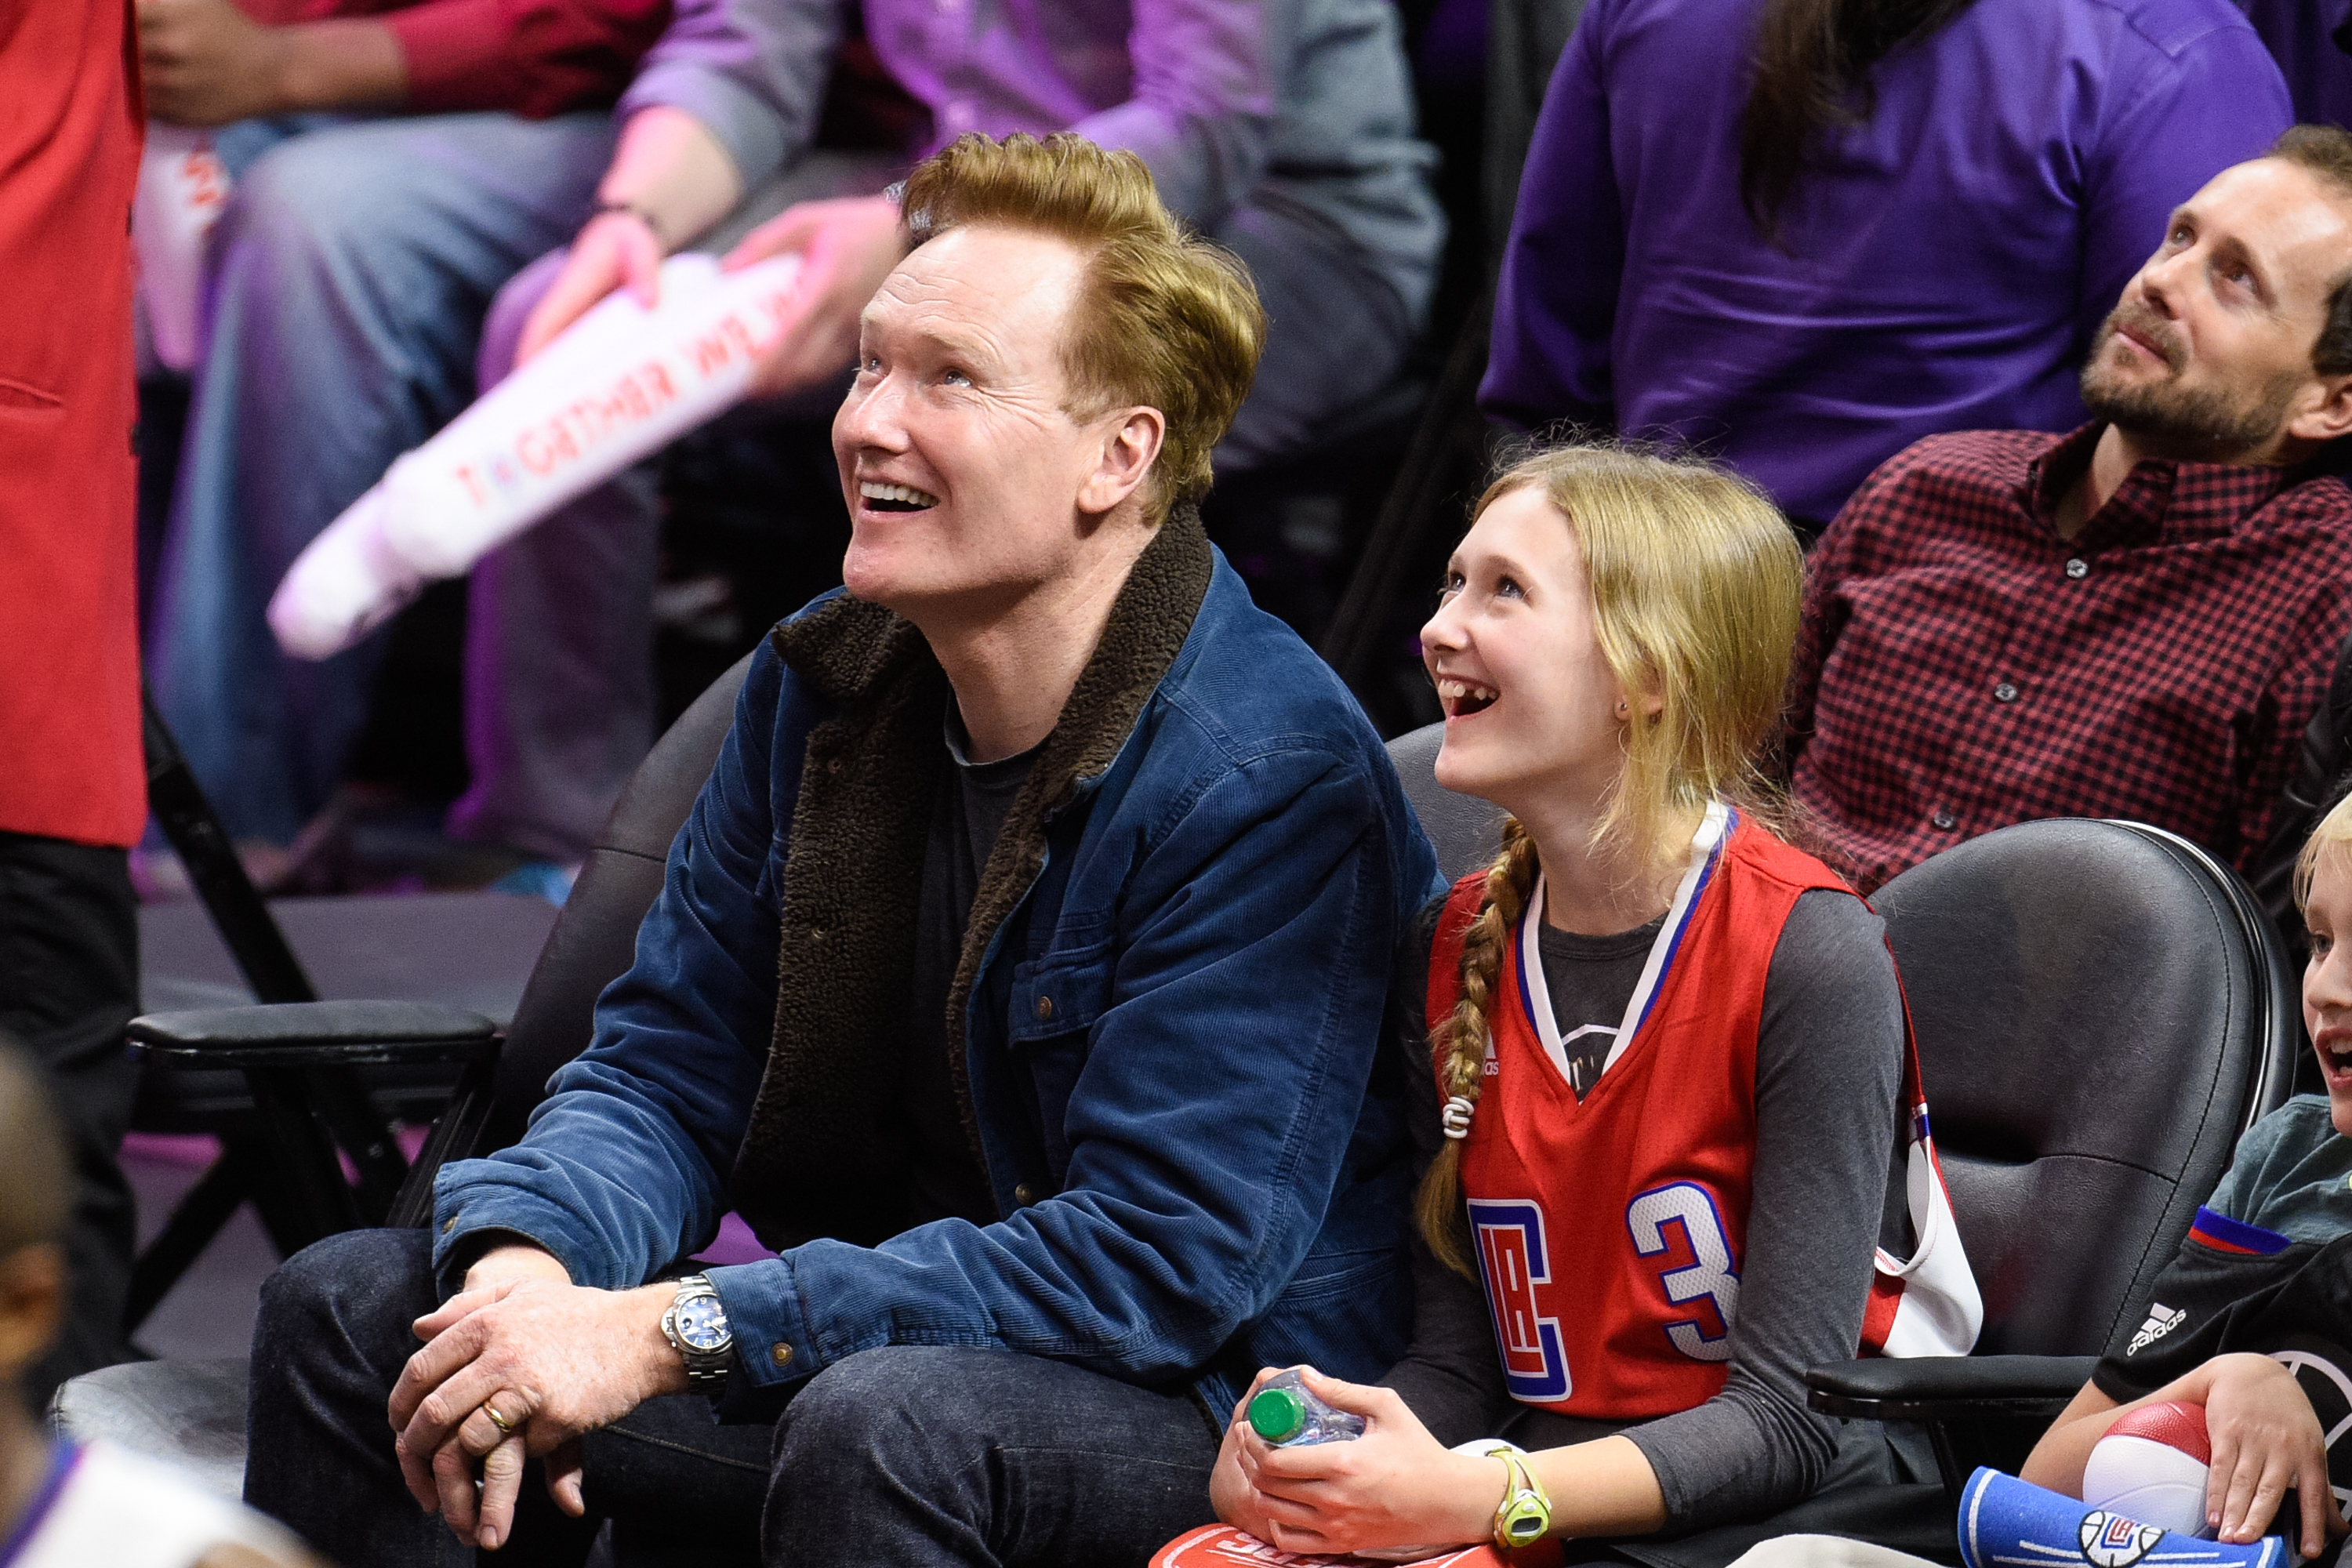 Conan O'Brien and Neve O'Brien at a basketball game between the Houston Rockets and the Los Angeles Clippers on January 18, 2016, in Los Angeles | Source: Getty Images